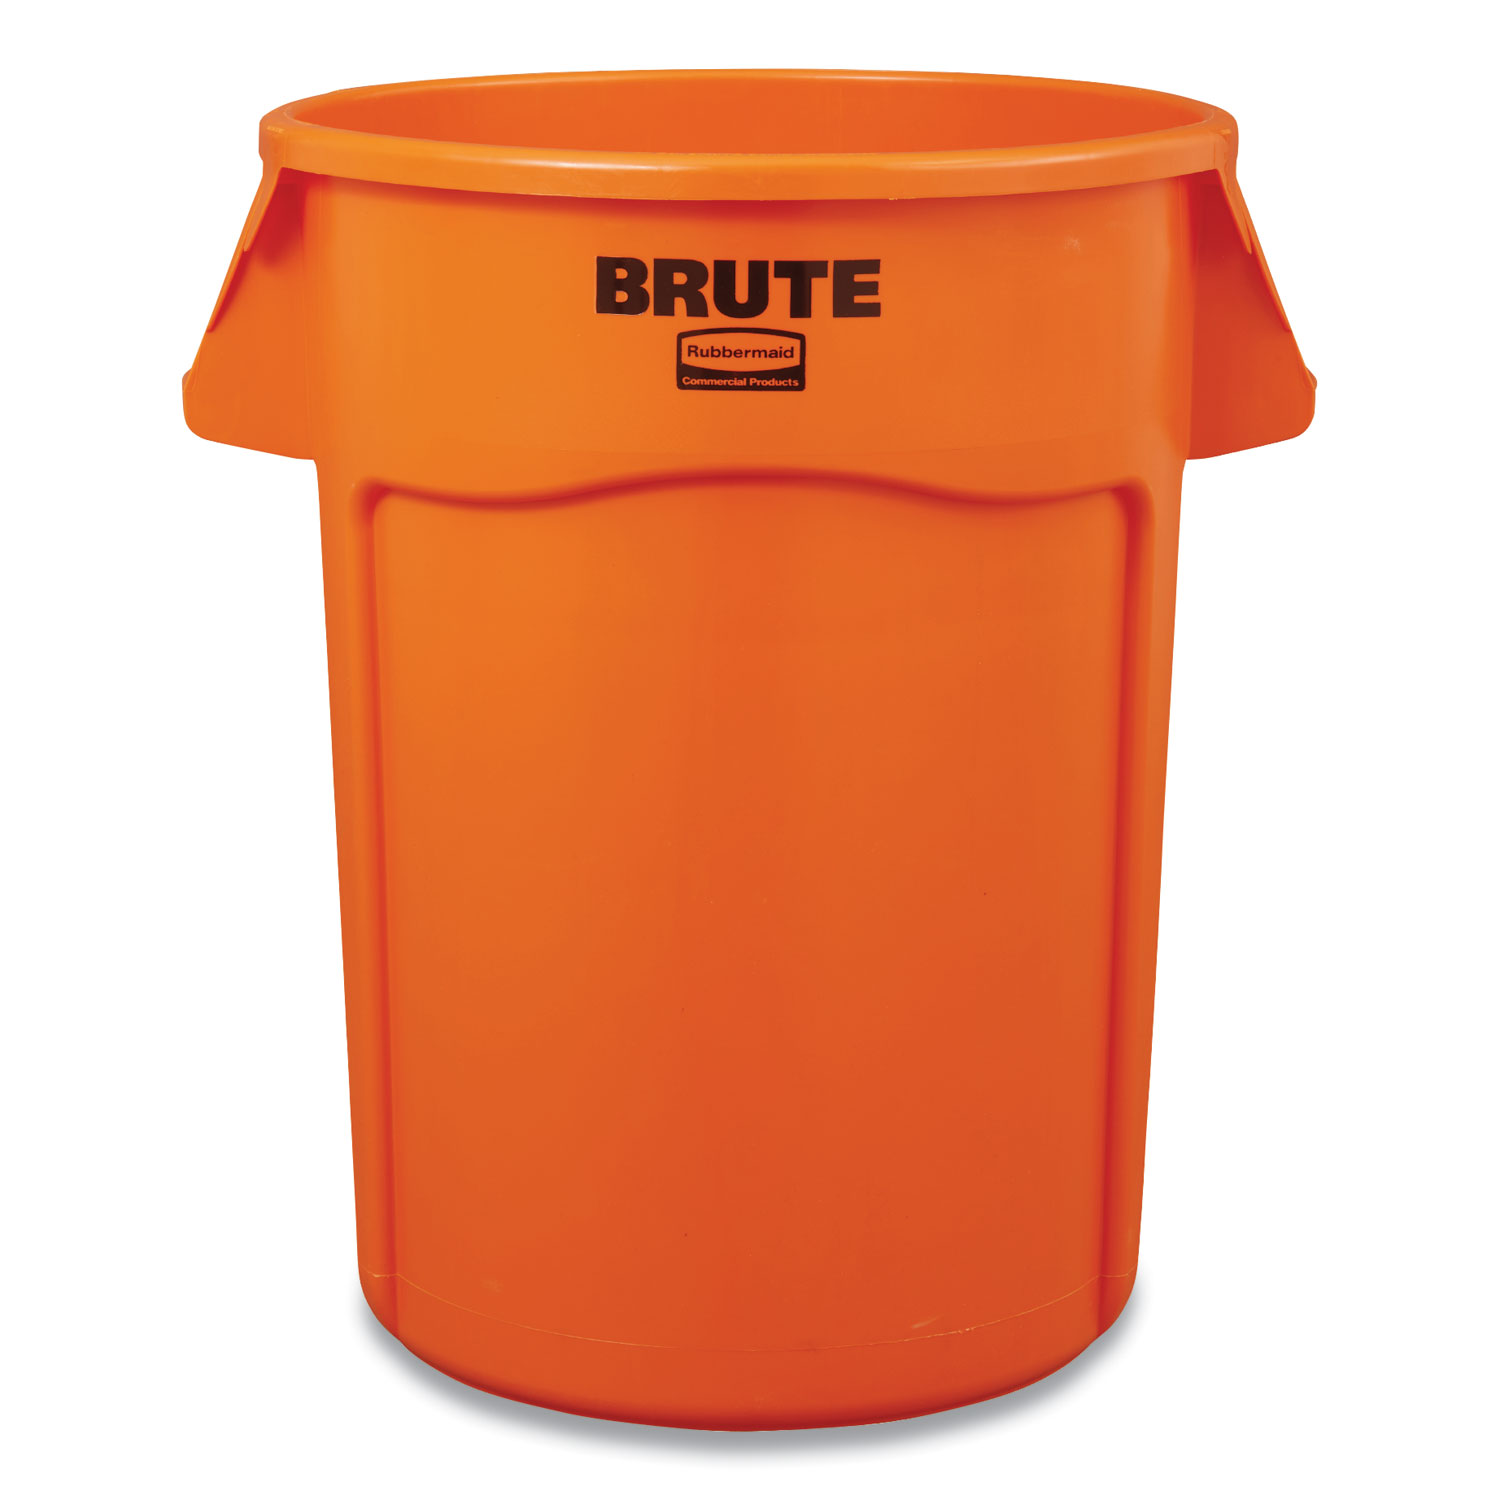 Rubbermaid® Commercial Brute Round Containers, 32 gal, Orange